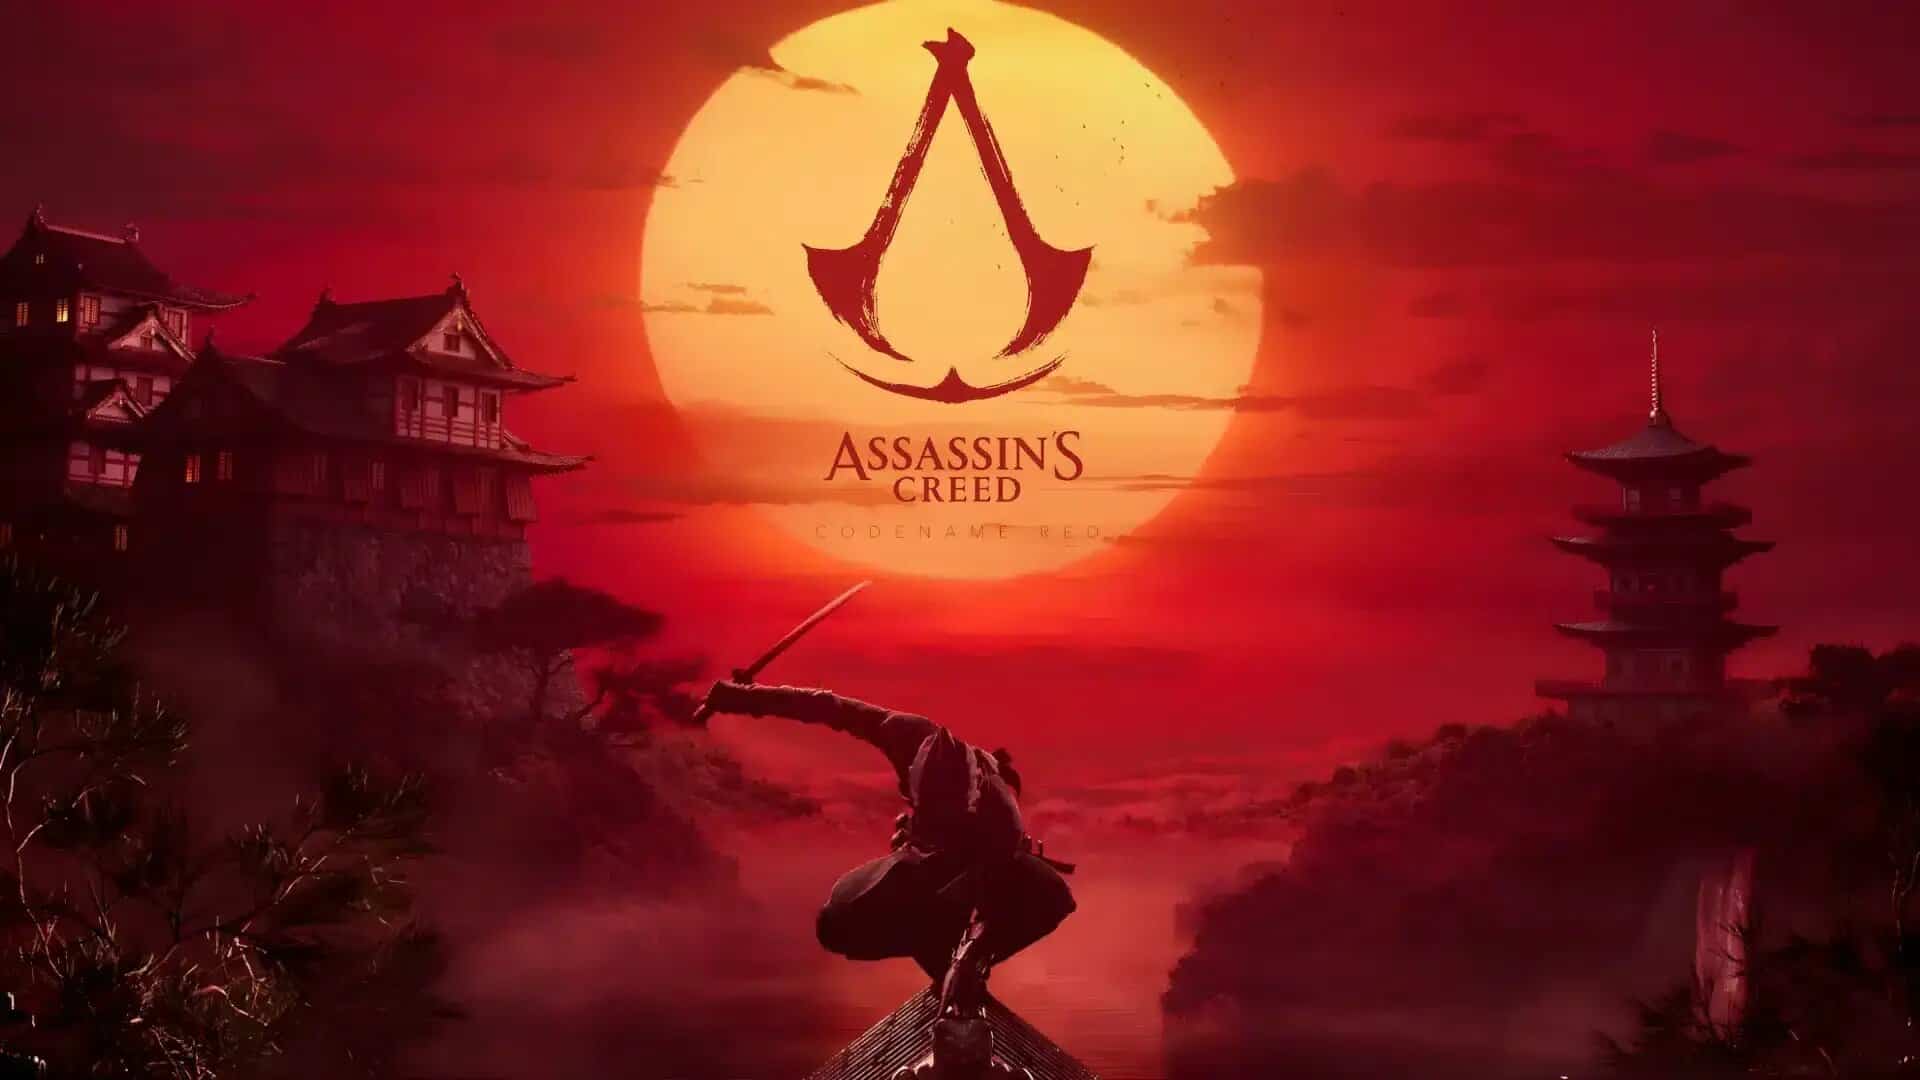 Assassin's Creed 2023 Got LEAKED! 